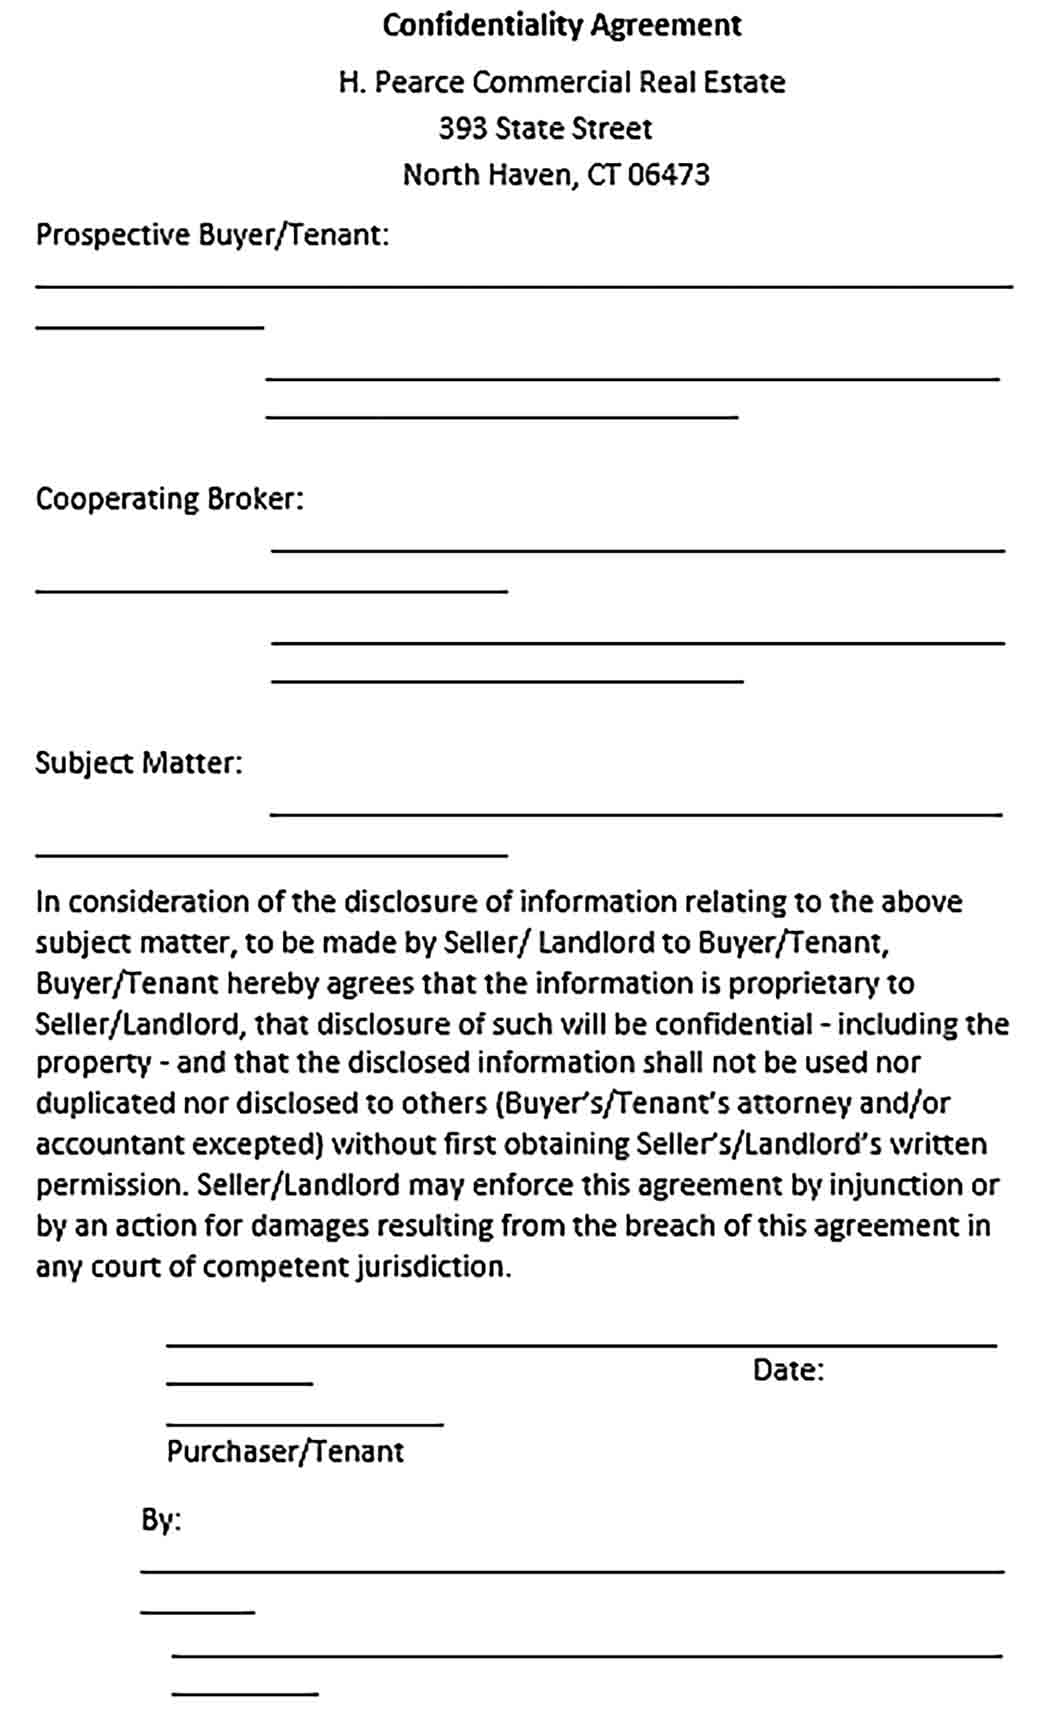 Sample Landlord Confidentiality Agreement